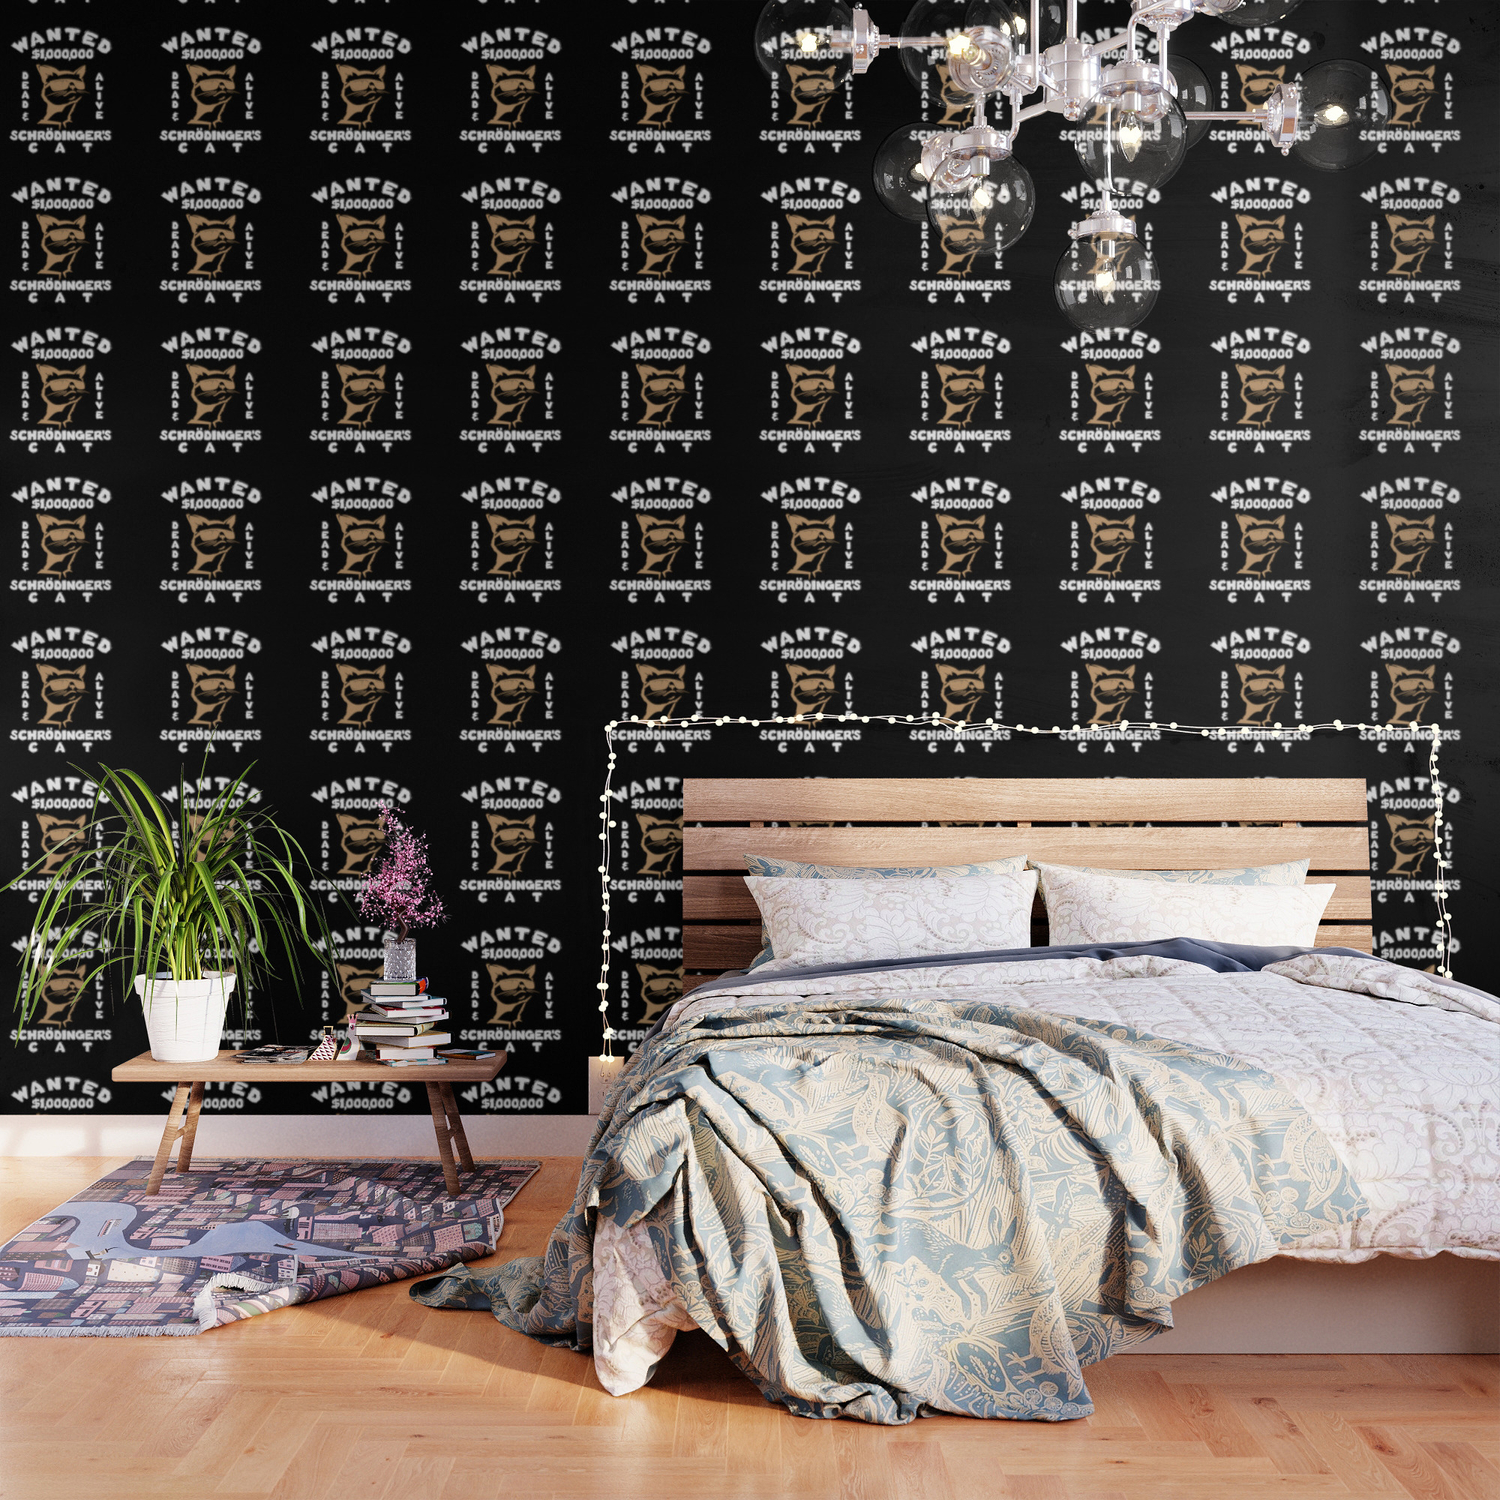 Wanted Dead & Alive Schrodinger's Cat Gift Wallpaper by Fresan78 | Society6